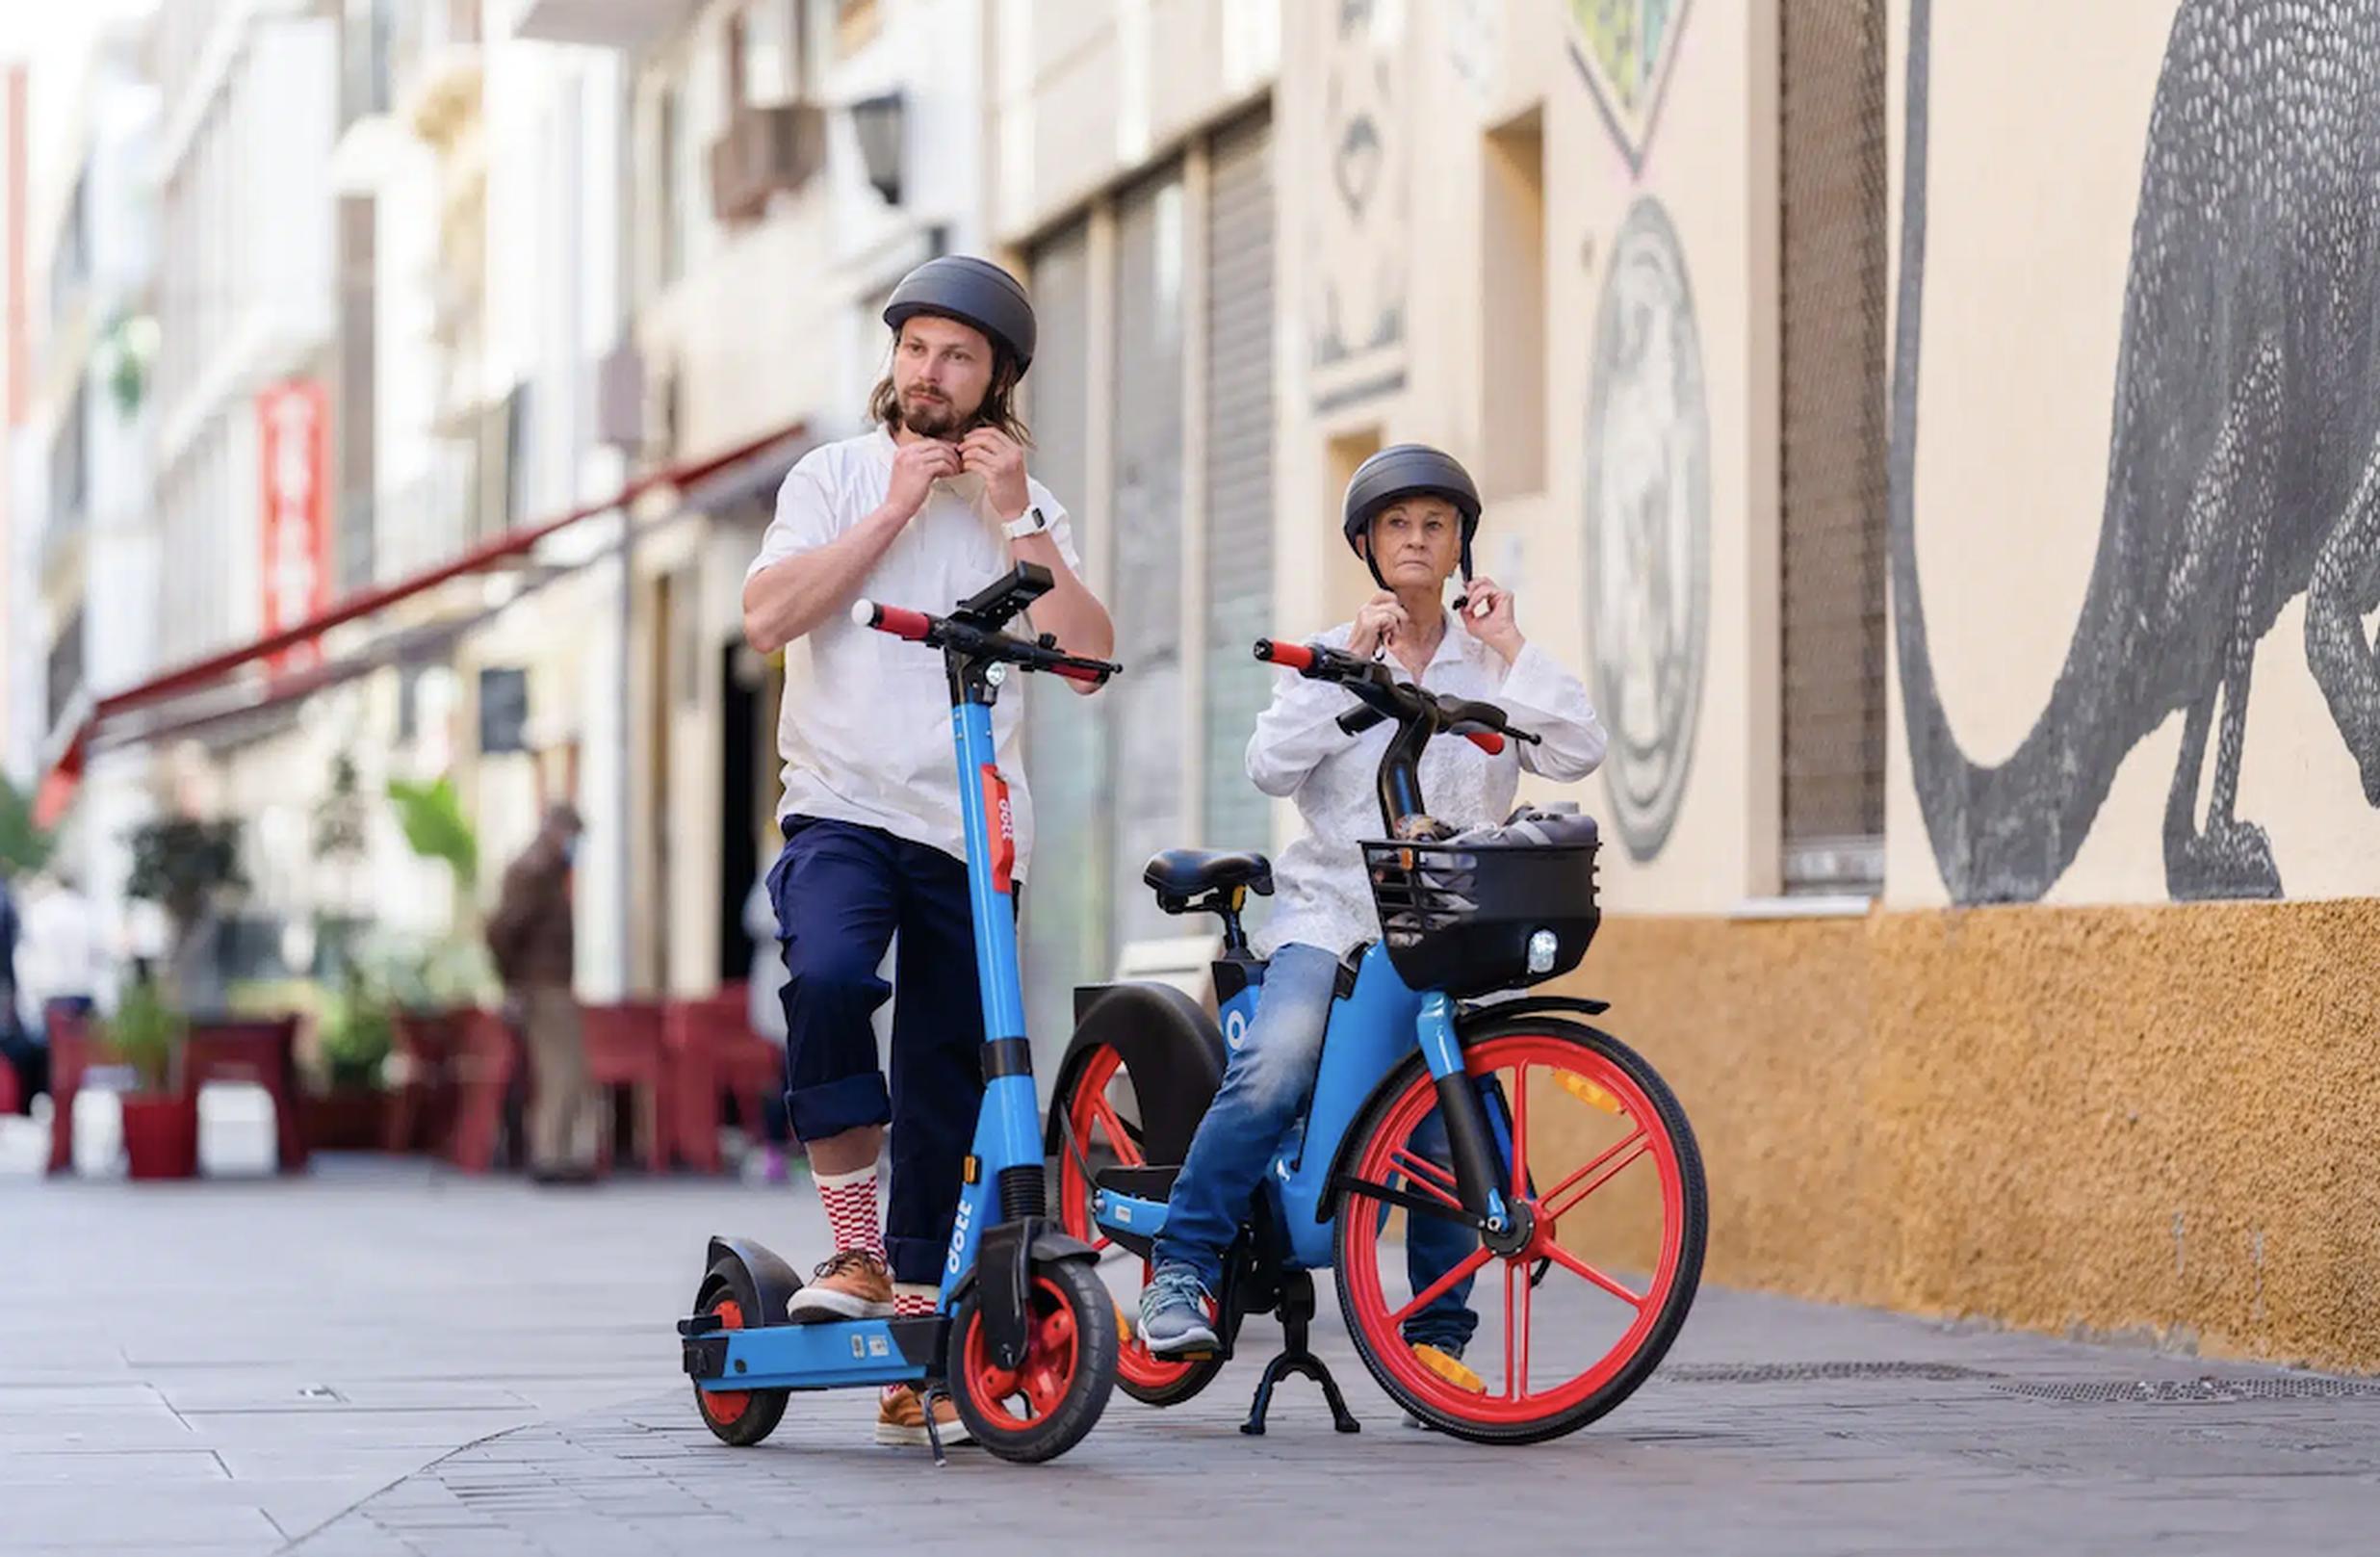 36% of Dott riders are using the scooters more as a result of the energy crisis